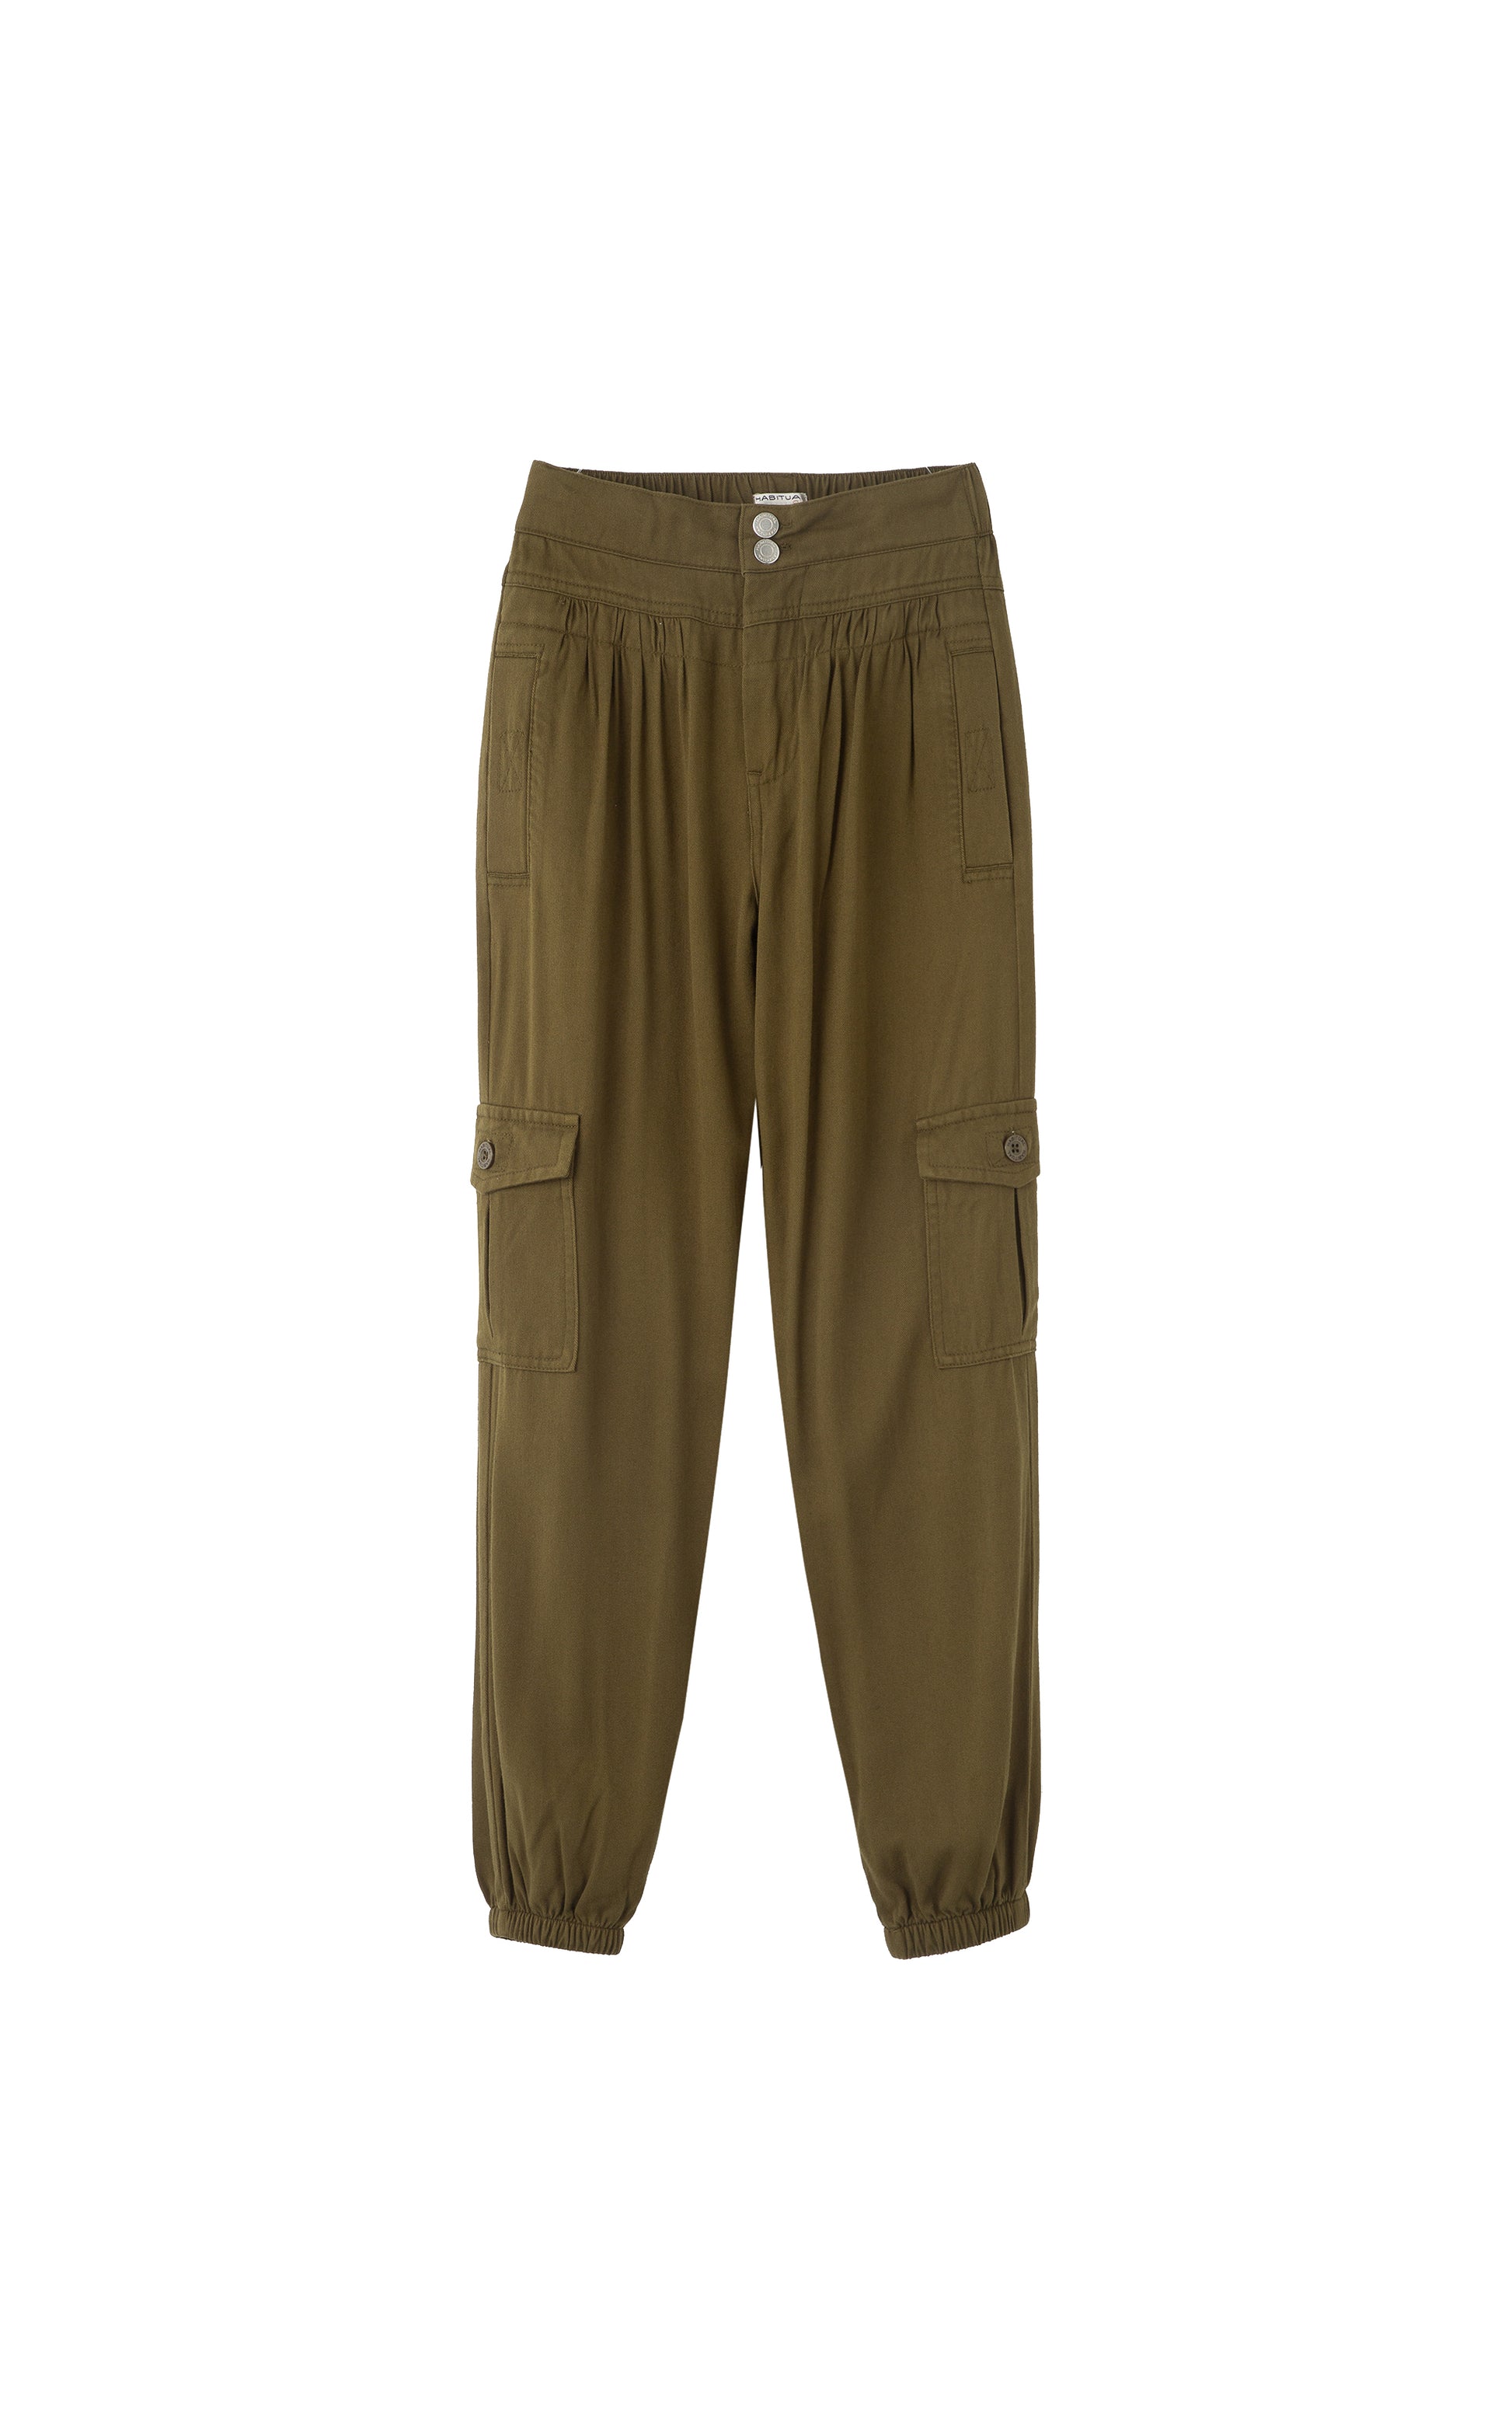 Olive pants with cargo pockets, pleat accents, and elastic ankle cuffs. 